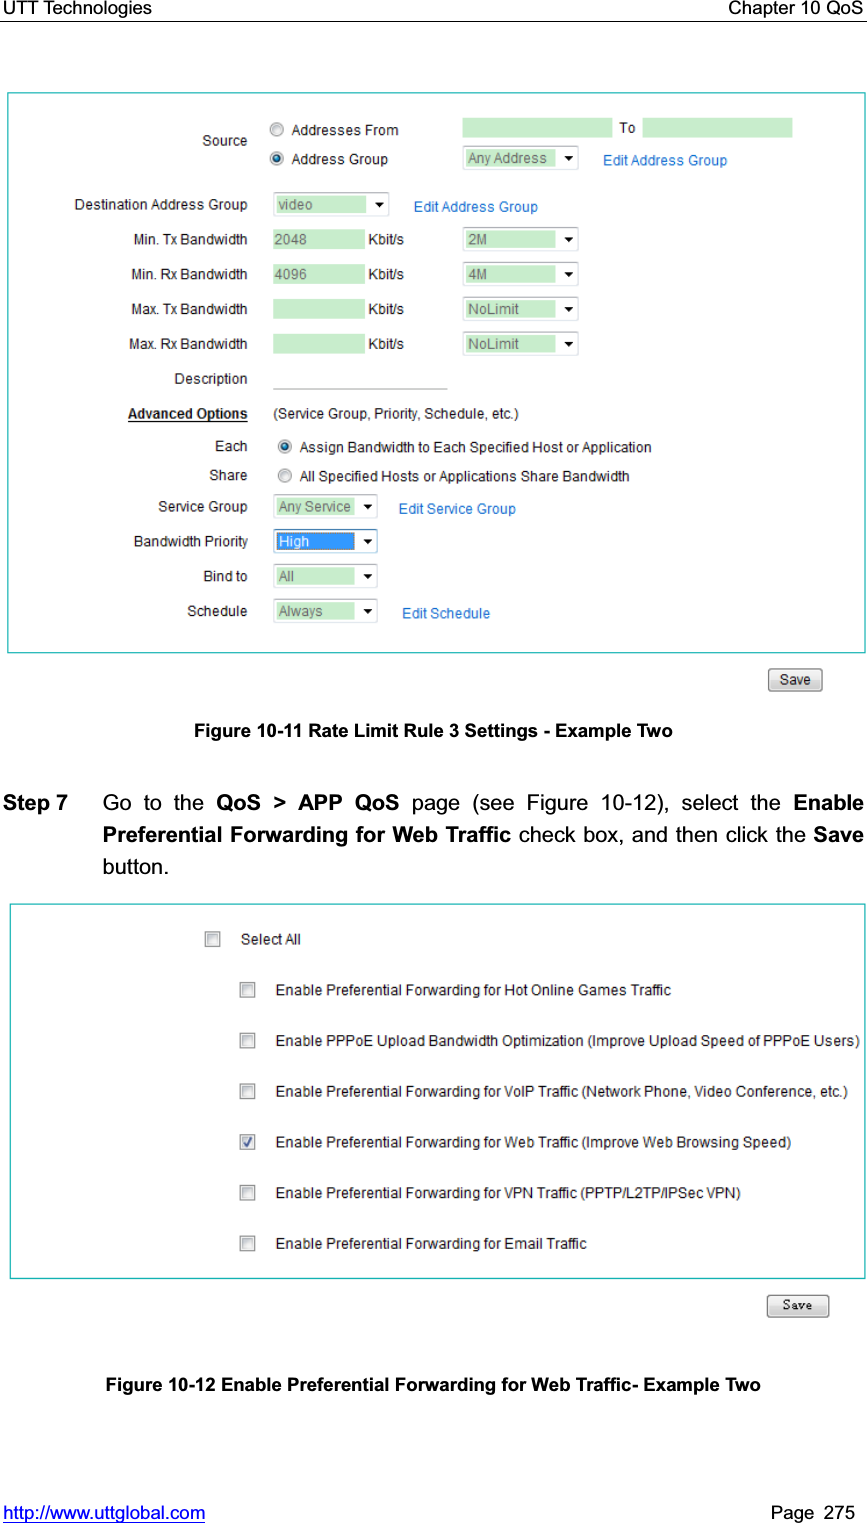 UTT Technologies    Chapter 10 QoS   http://www.uttglobal.com Page 275 Figure 10-11 Rate Limit Rule 3 Settings - Example Two Step 7  Go to the QoS &gt; APP QoS page (see Figure 10-12), select the Enable Preferential Forwarding for Web Traffic check box, and then click the Save button.Figure 10-12 Enable Preferential Forwarding for Web Traffic- Example Two 